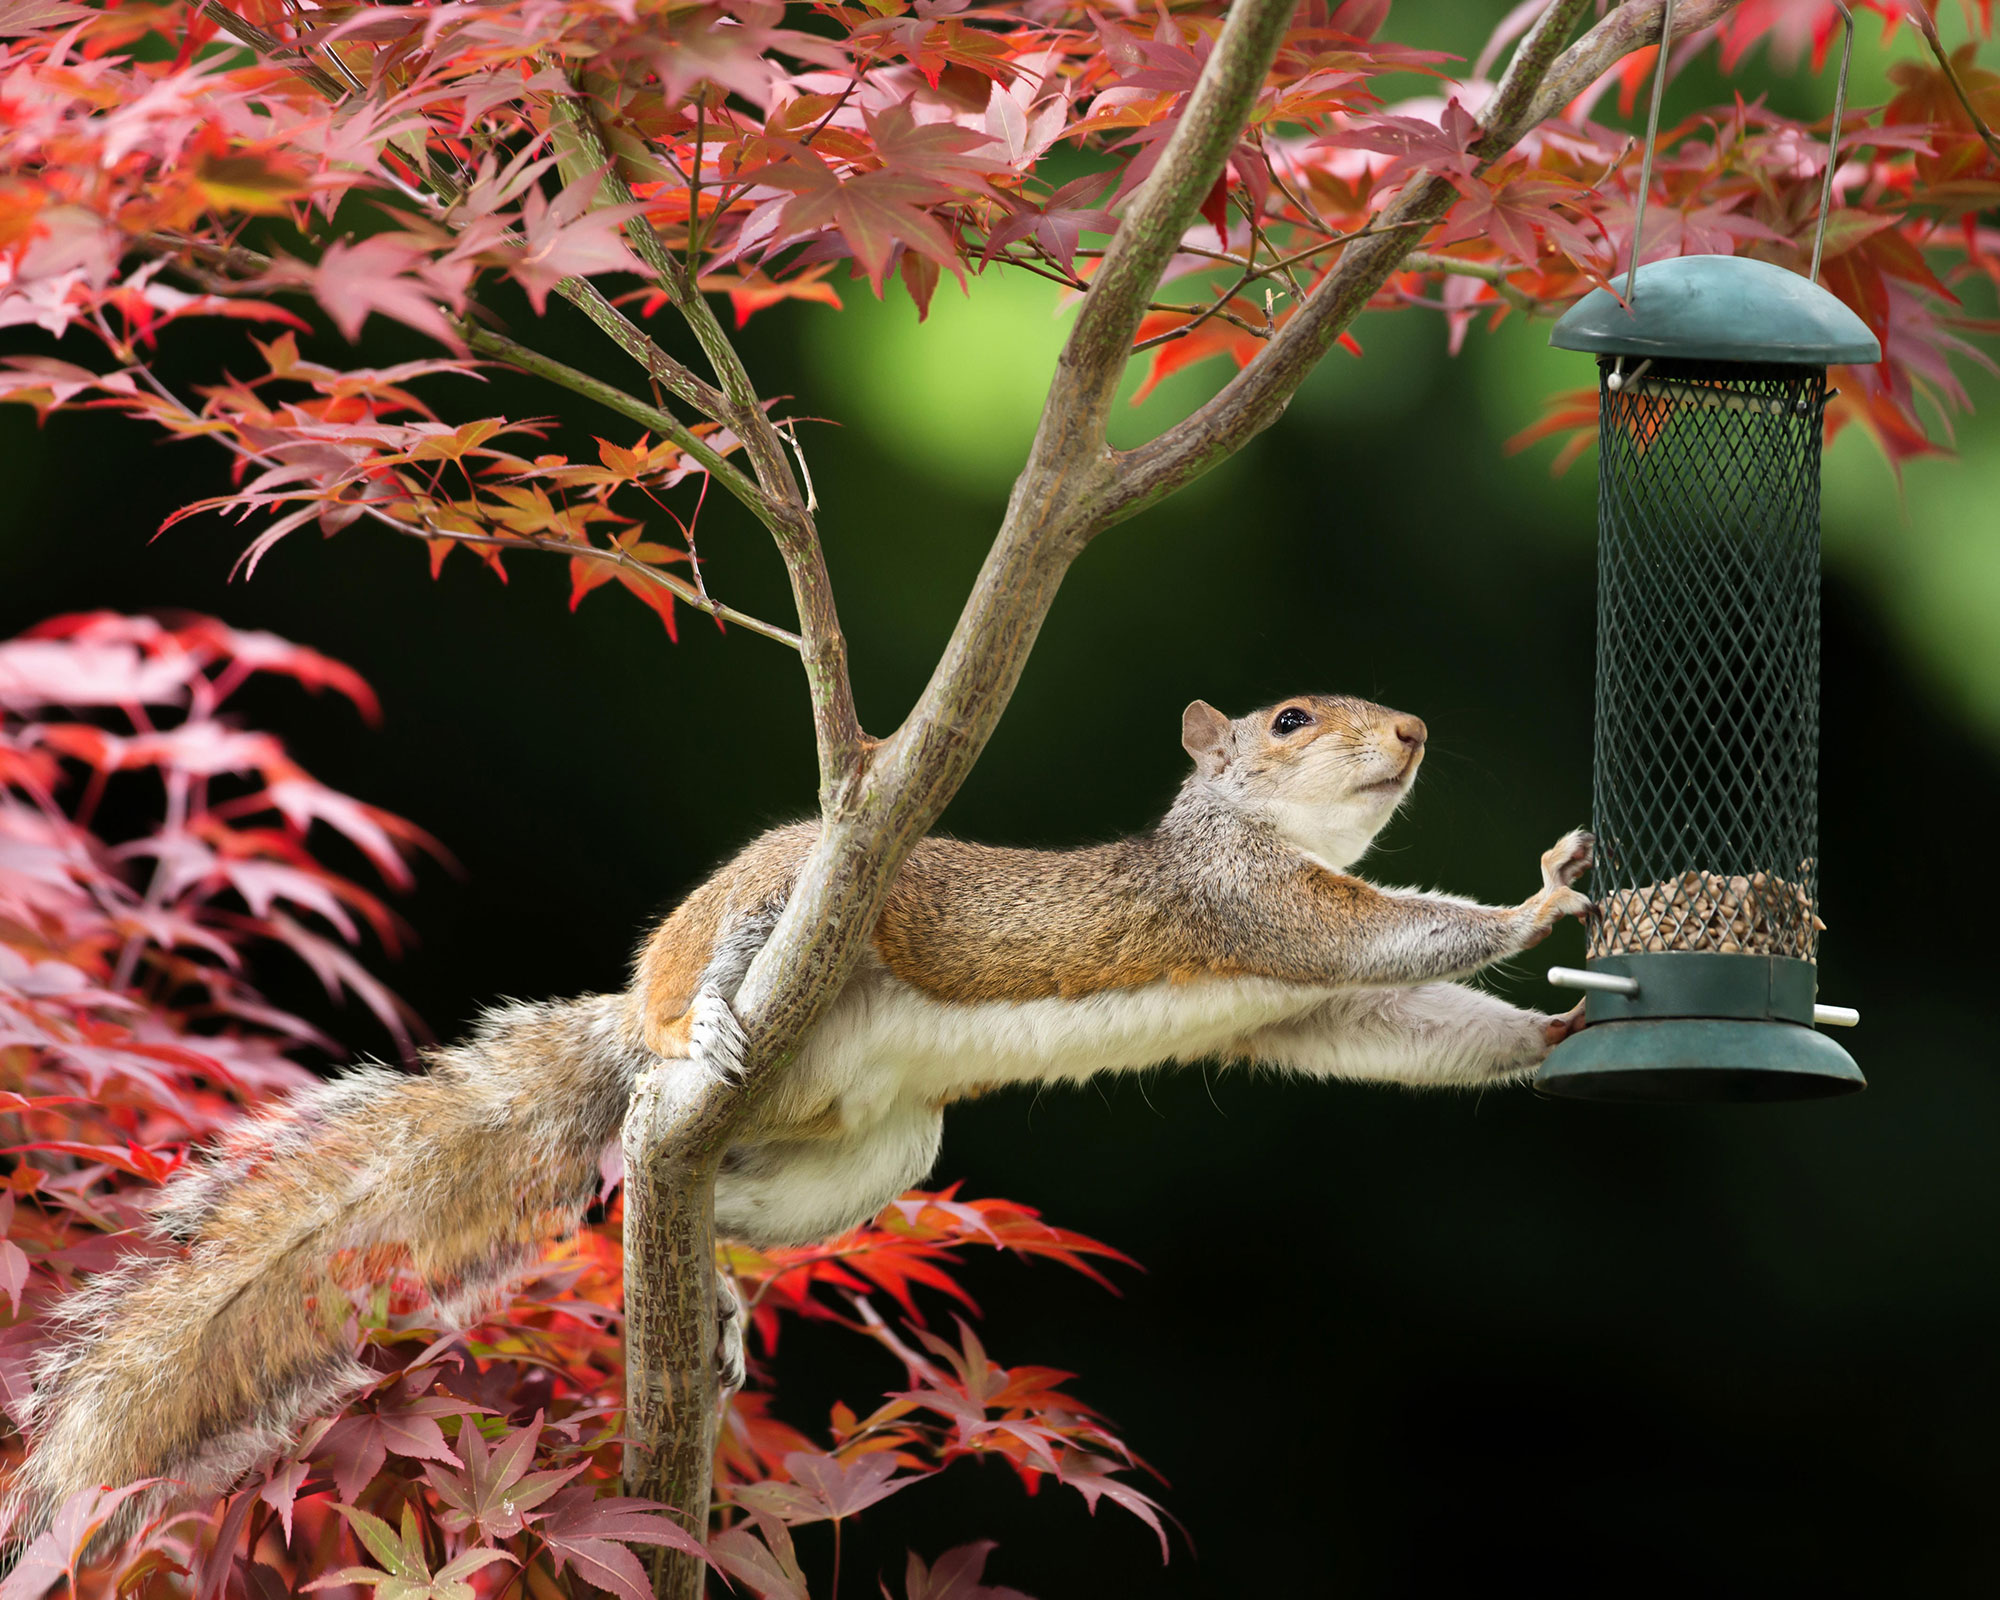 How To Keep Squirrels Out Of Plants How to keep squirrels out of potted plants |